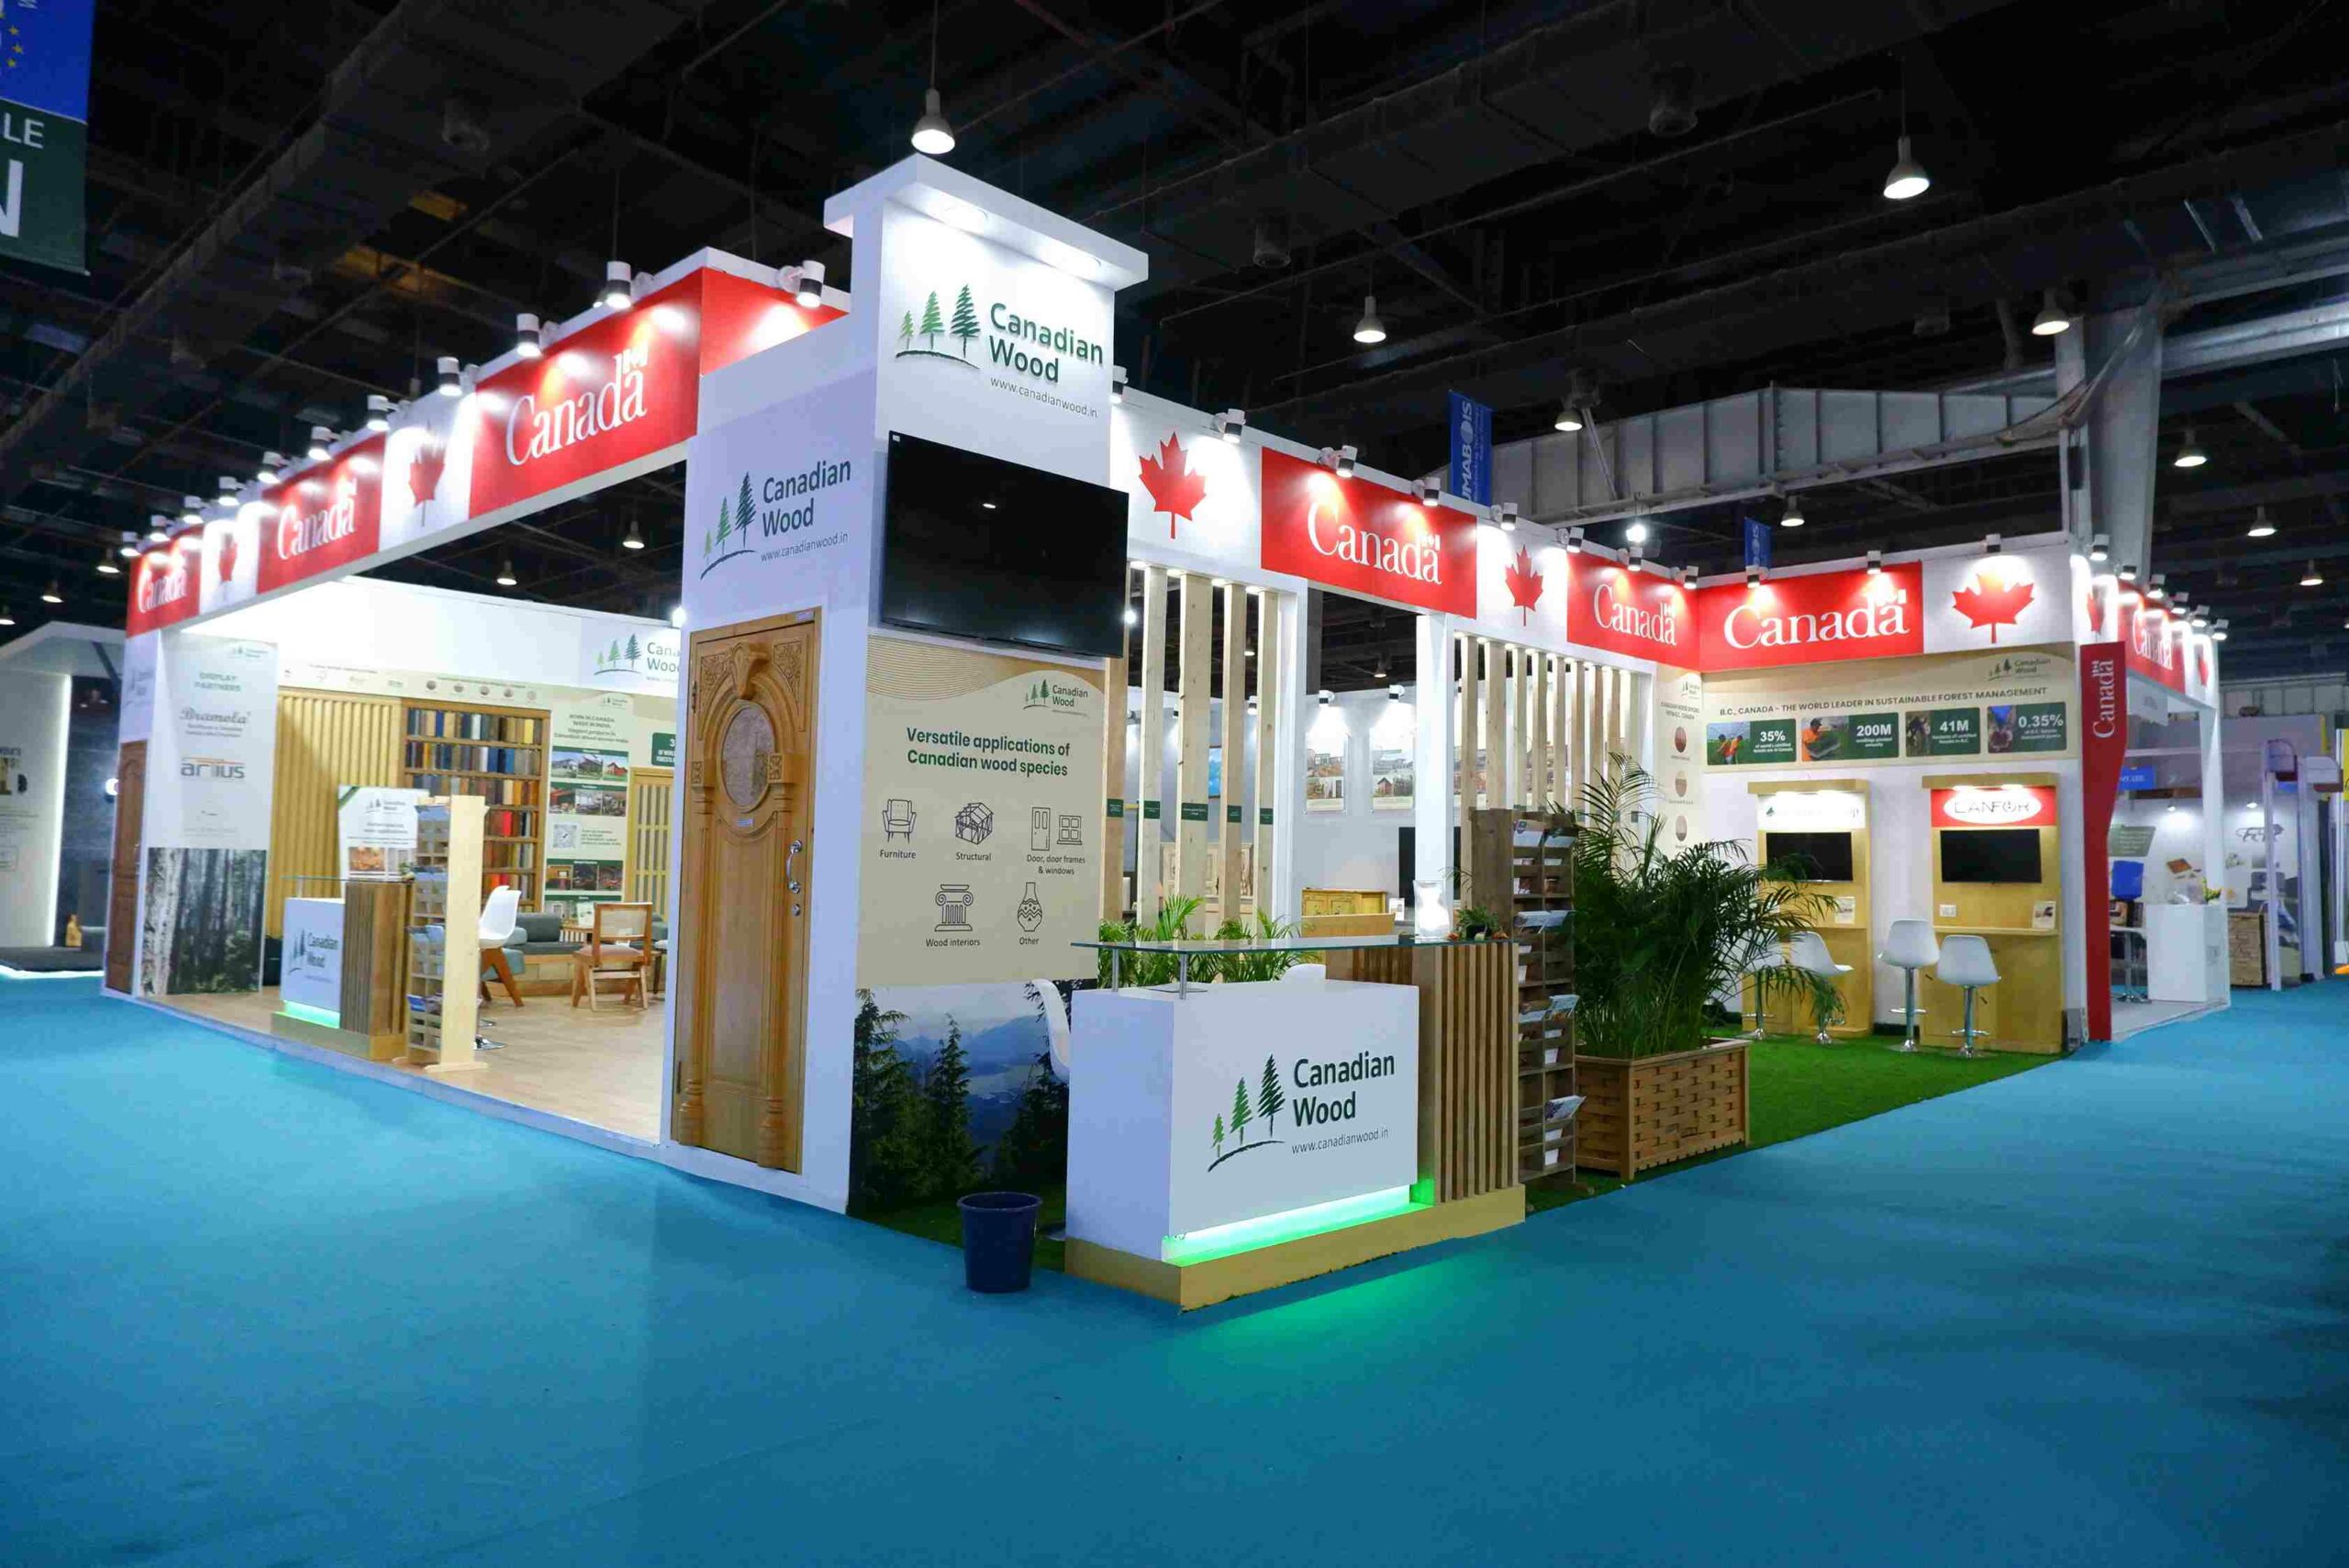 Canadian wood booth at DelhiWood showcasing innovative wood products for different applications